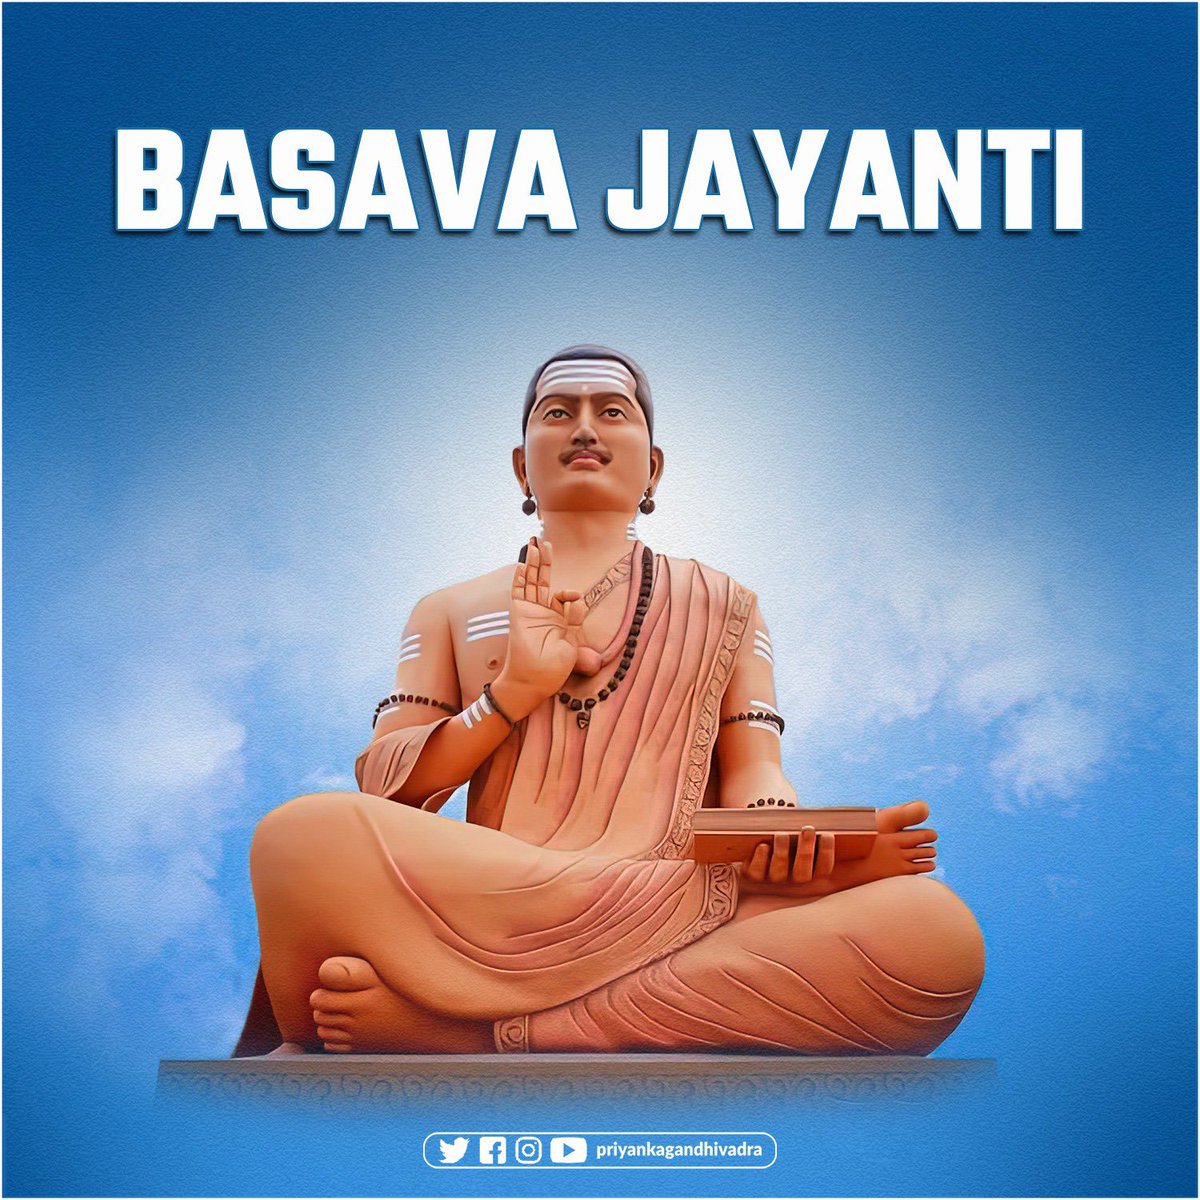 On the occasion of #BasavaJayanti, let's celebrate the legacy of a great philosopher & social reformer who stood for social equality & a life free from social discrimination. 

Let's take inspiration from his teachings & work towards building a more just and compassionate society